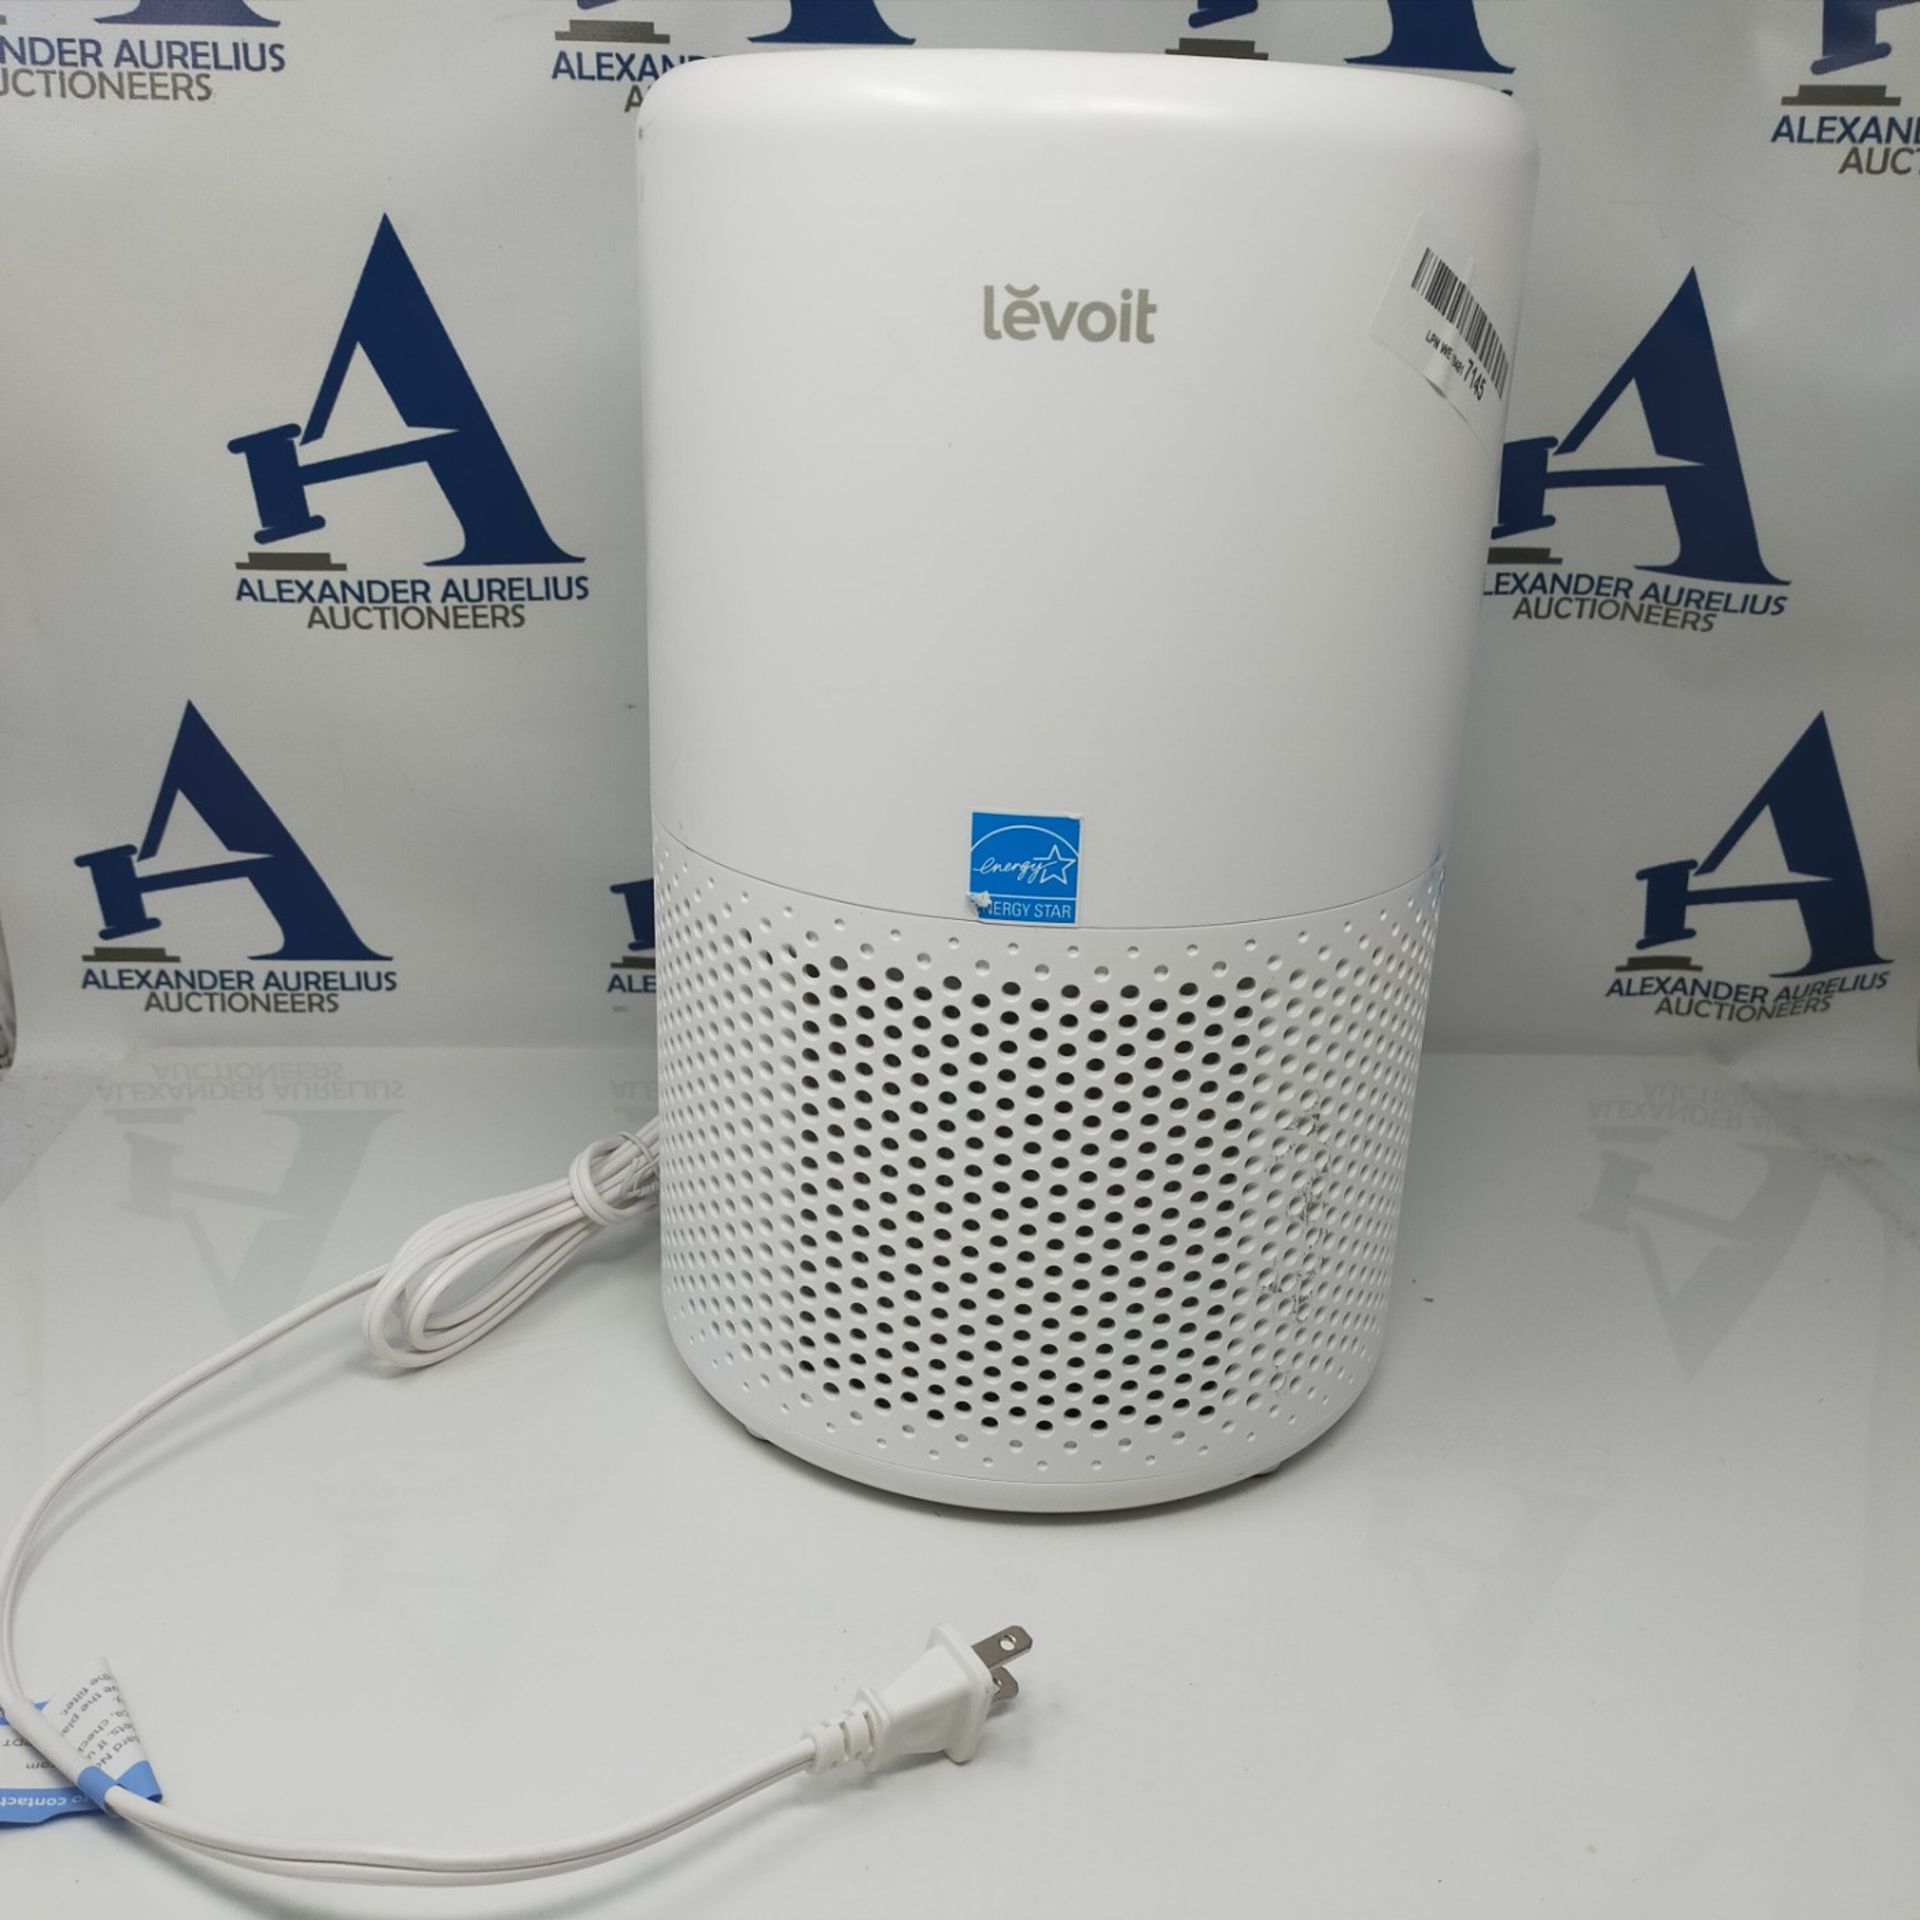 RRP £76.00 LEVOIT Smart WiFi Air Purifier for Home, Alexa Enabled H13 HEPA Filter, CADR 170m³/h, - Image 2 of 2